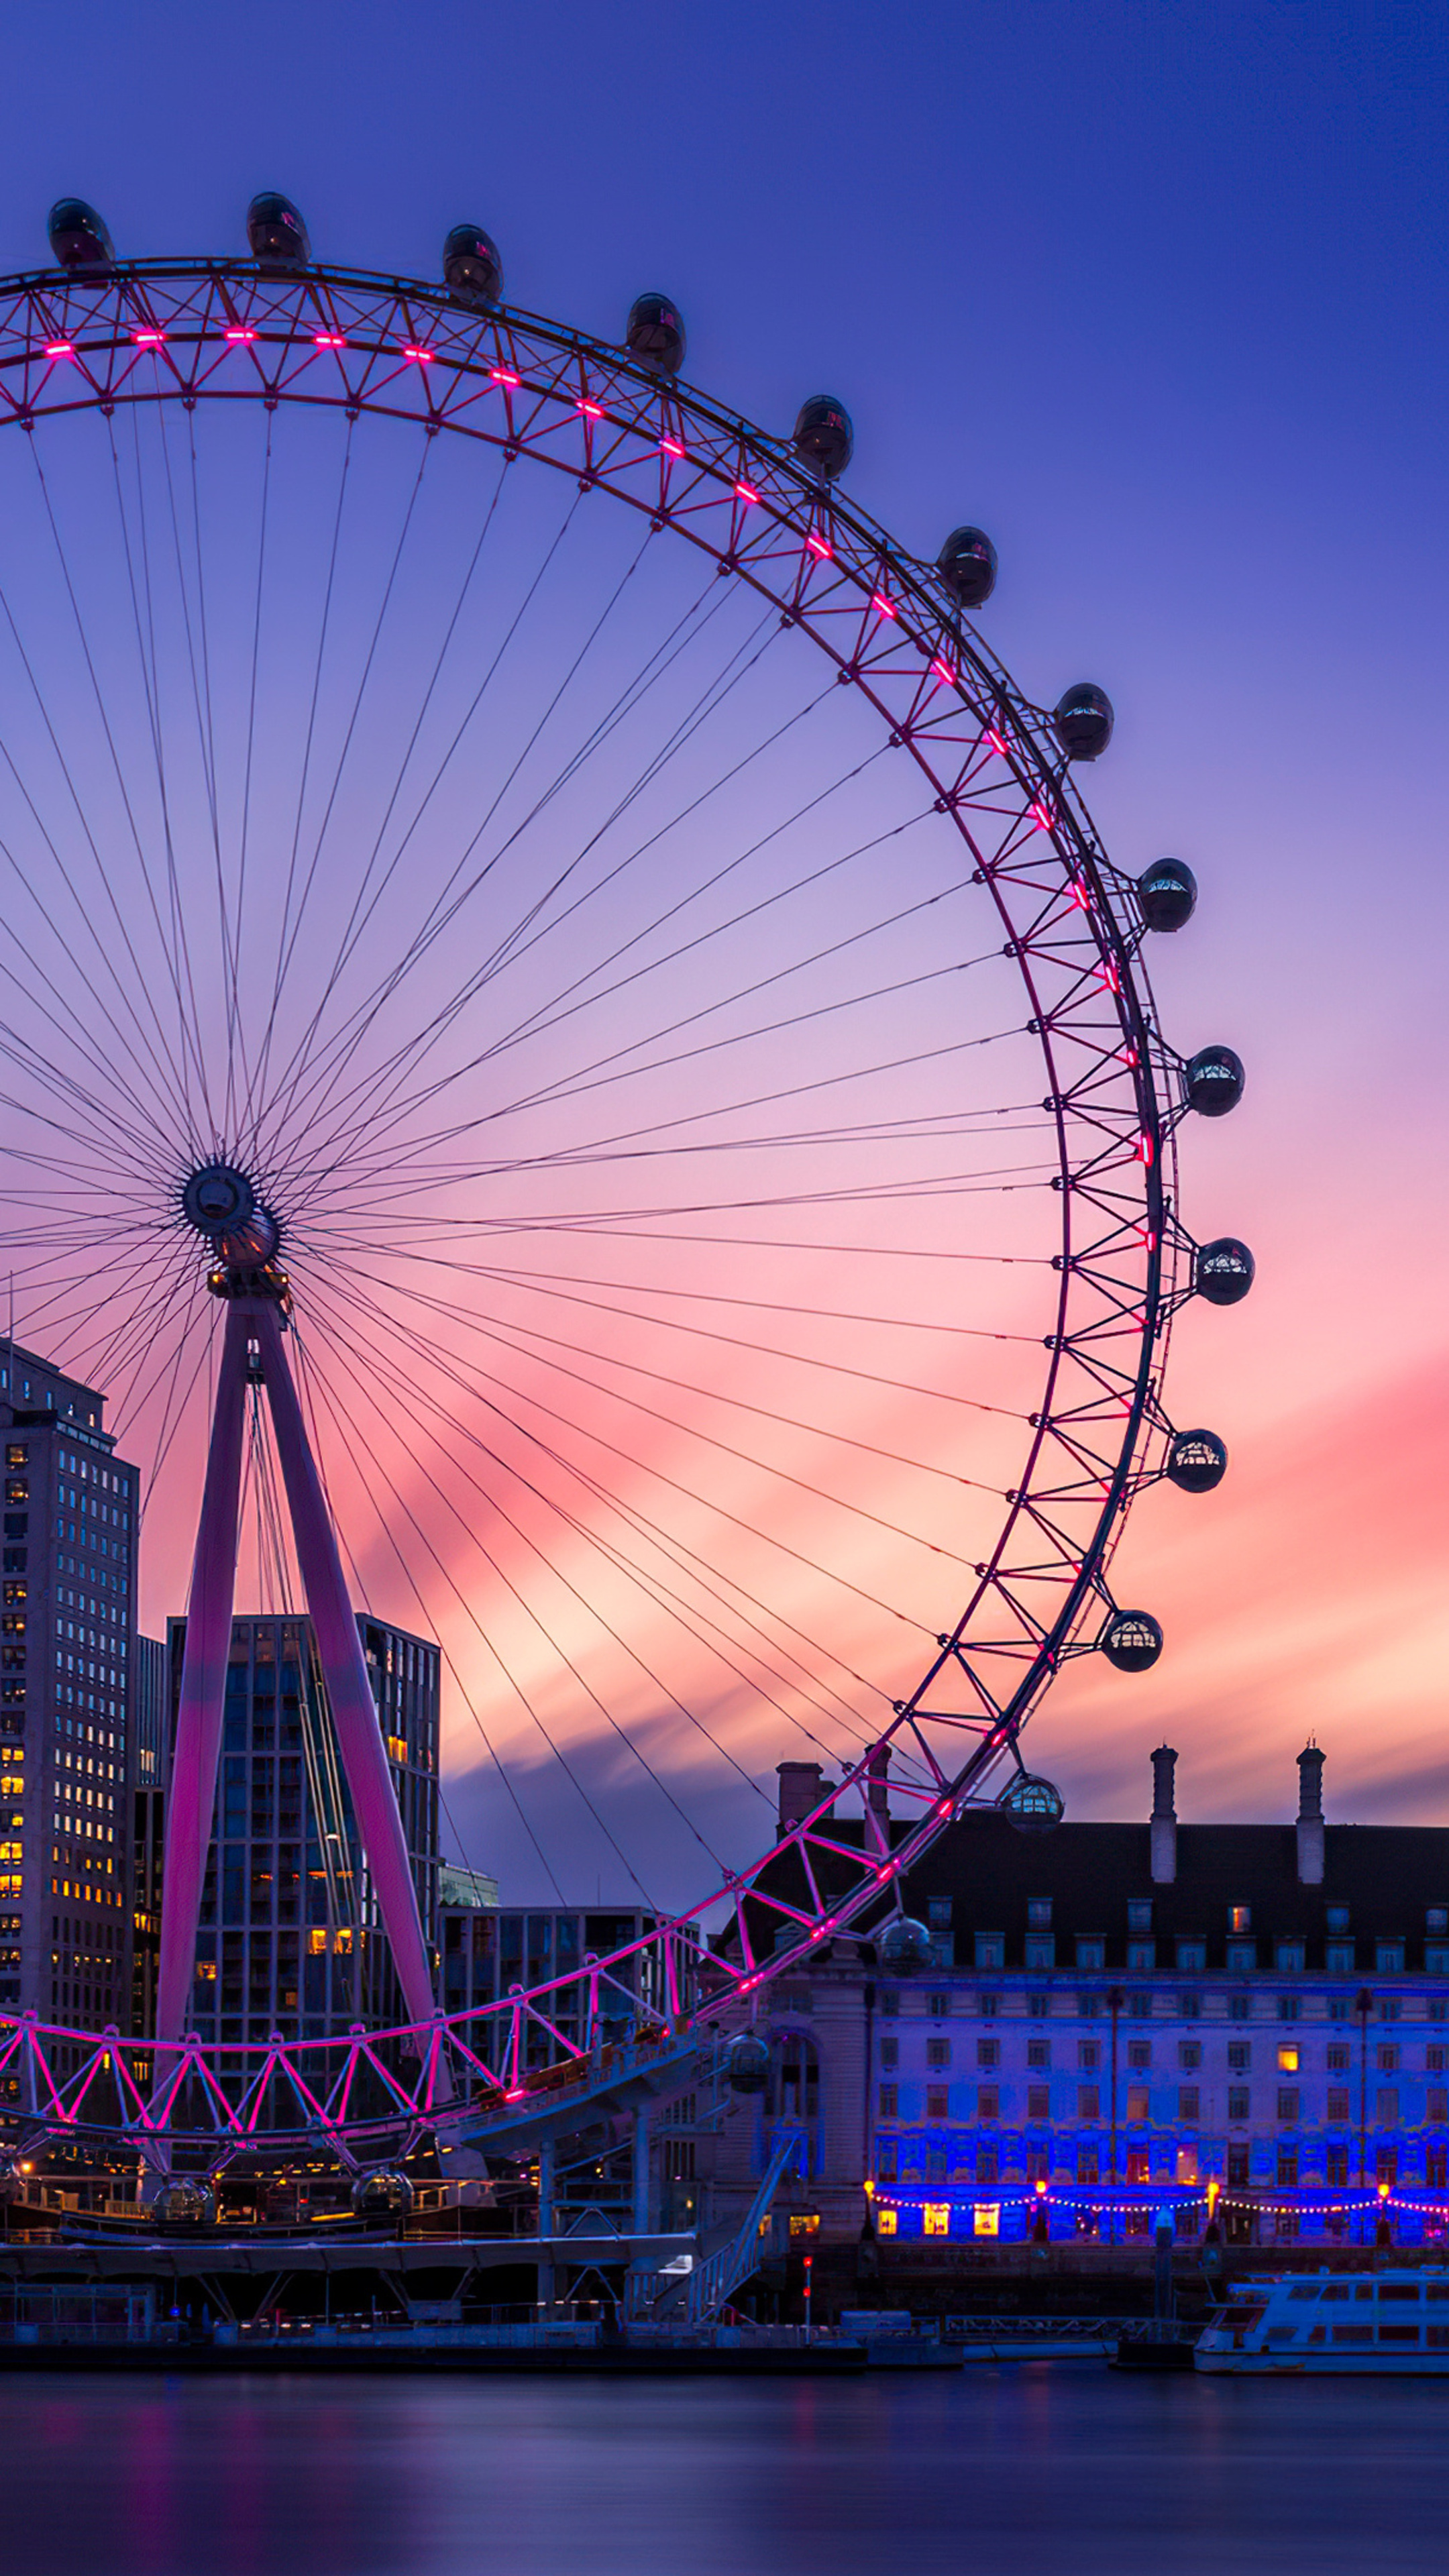 London: The London Eye, A cantilevered observation wheel on the South Bank of the River Thames. 2160x3840 4K Background.